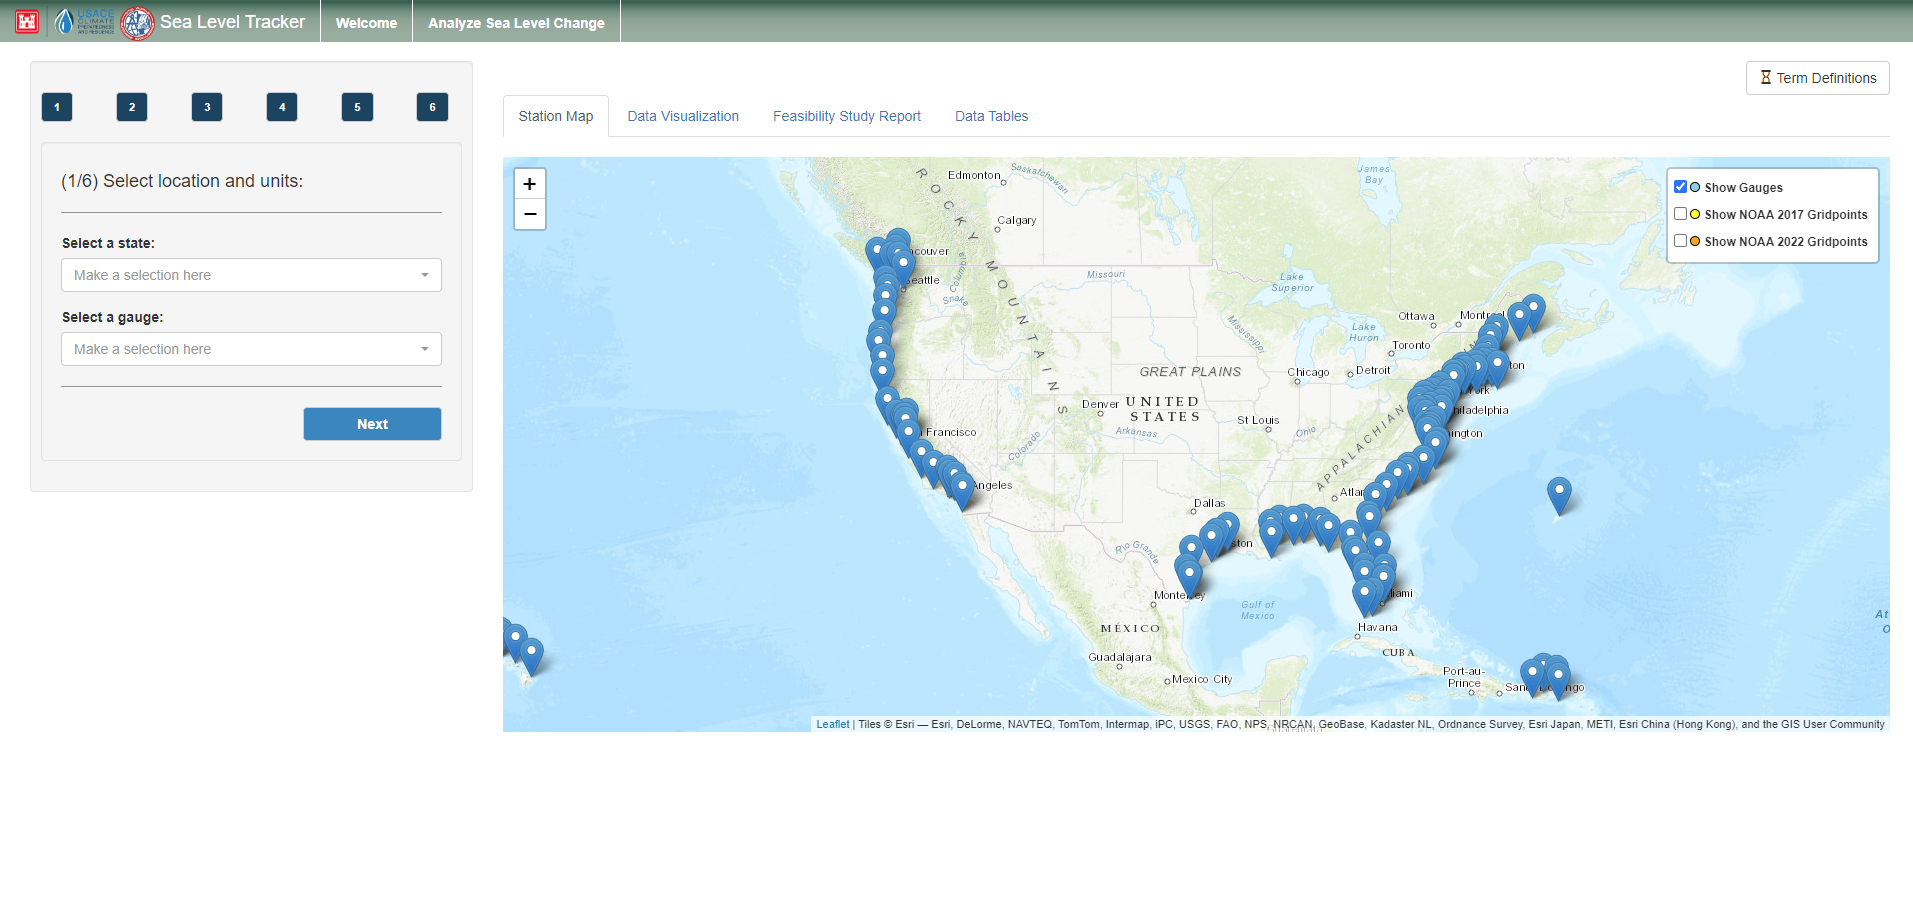 A screenshot of the tool, Sea Level Tracker, being used.